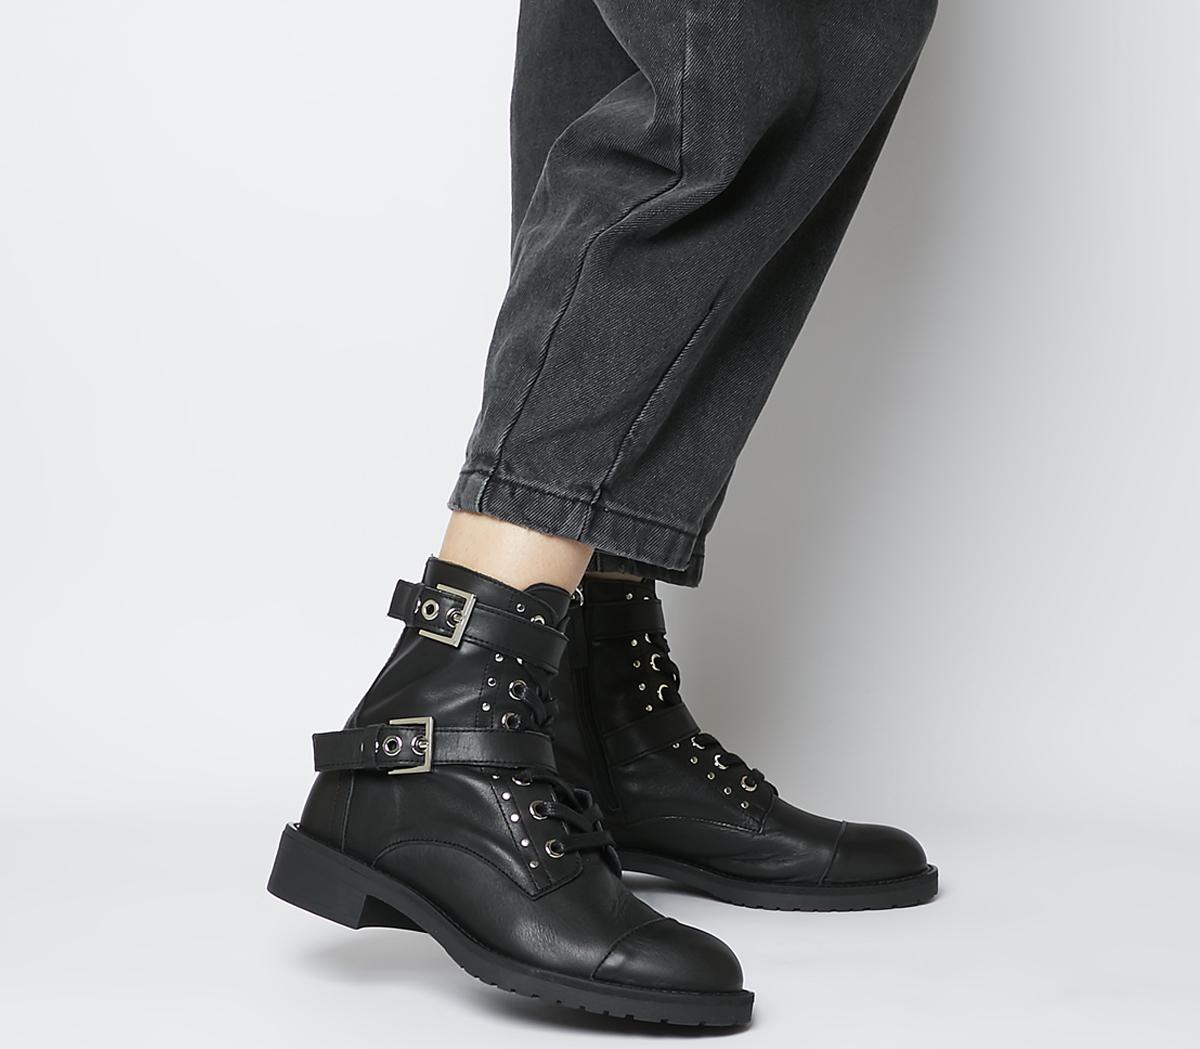 Accomplice Lace Up Buckle Boots